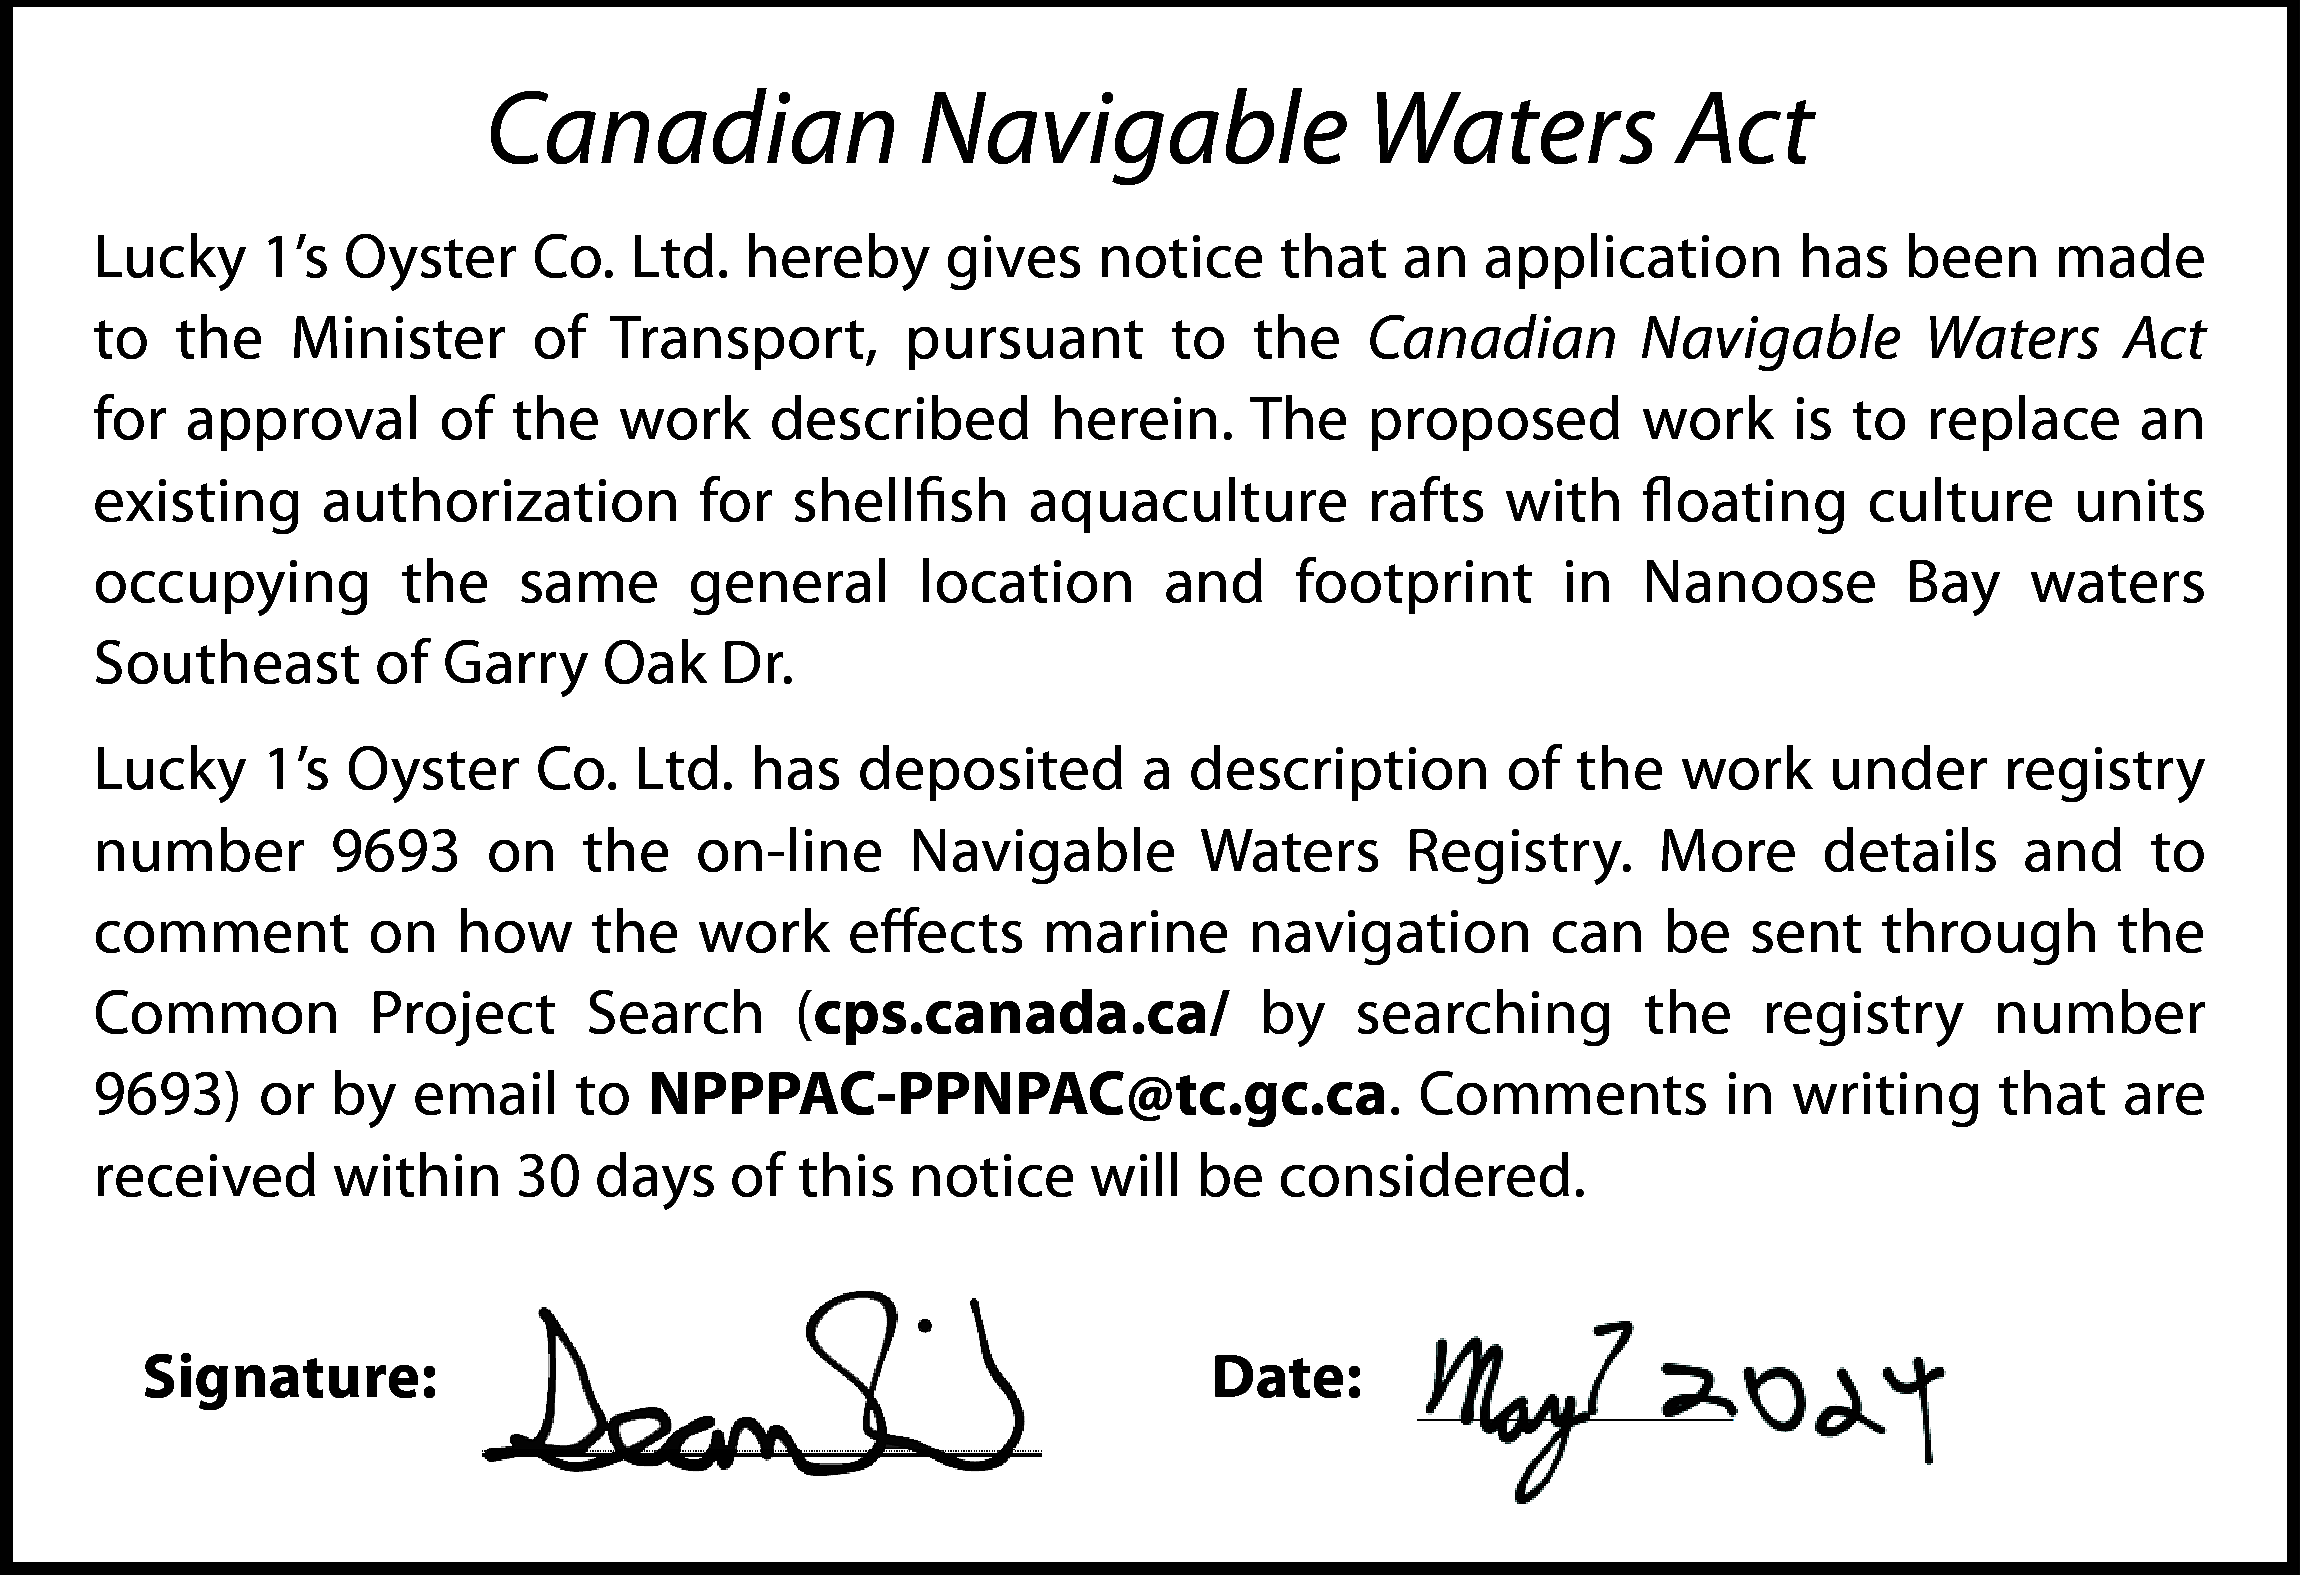 Canadian Navigable Waters Act <br>Lucky  Canadian Navigable Waters Act  Lucky 1’s Oyster Co. Ltd. hereby gives notice that an application has been made  to the Minister of Transport, pursuant to the Canadian Navigable Waters Act  for approval of the work described herein. The proposed work is to replace an  existing authorization for shellfish aquaculture rafts with floating culture units  occupying the same general location and footprint in Nanoose Bay waters  Southeast of Garry Oak Dr.  Lucky 1’s Oyster Co. Ltd. has deposited a description of the work under registry  number 9693 on the on-line Navigable Waters Registry. More details and to  comment on how the work effects marine navigation can be sent through the  Common Project Search (cps.canada.ca/ by searching the registry number  9693) or by email to NPPPAC-PPNPAC@tc.gc.ca. Comments in writing that are  received within 30 days of this notice will be considered.  Signature:    Date:    